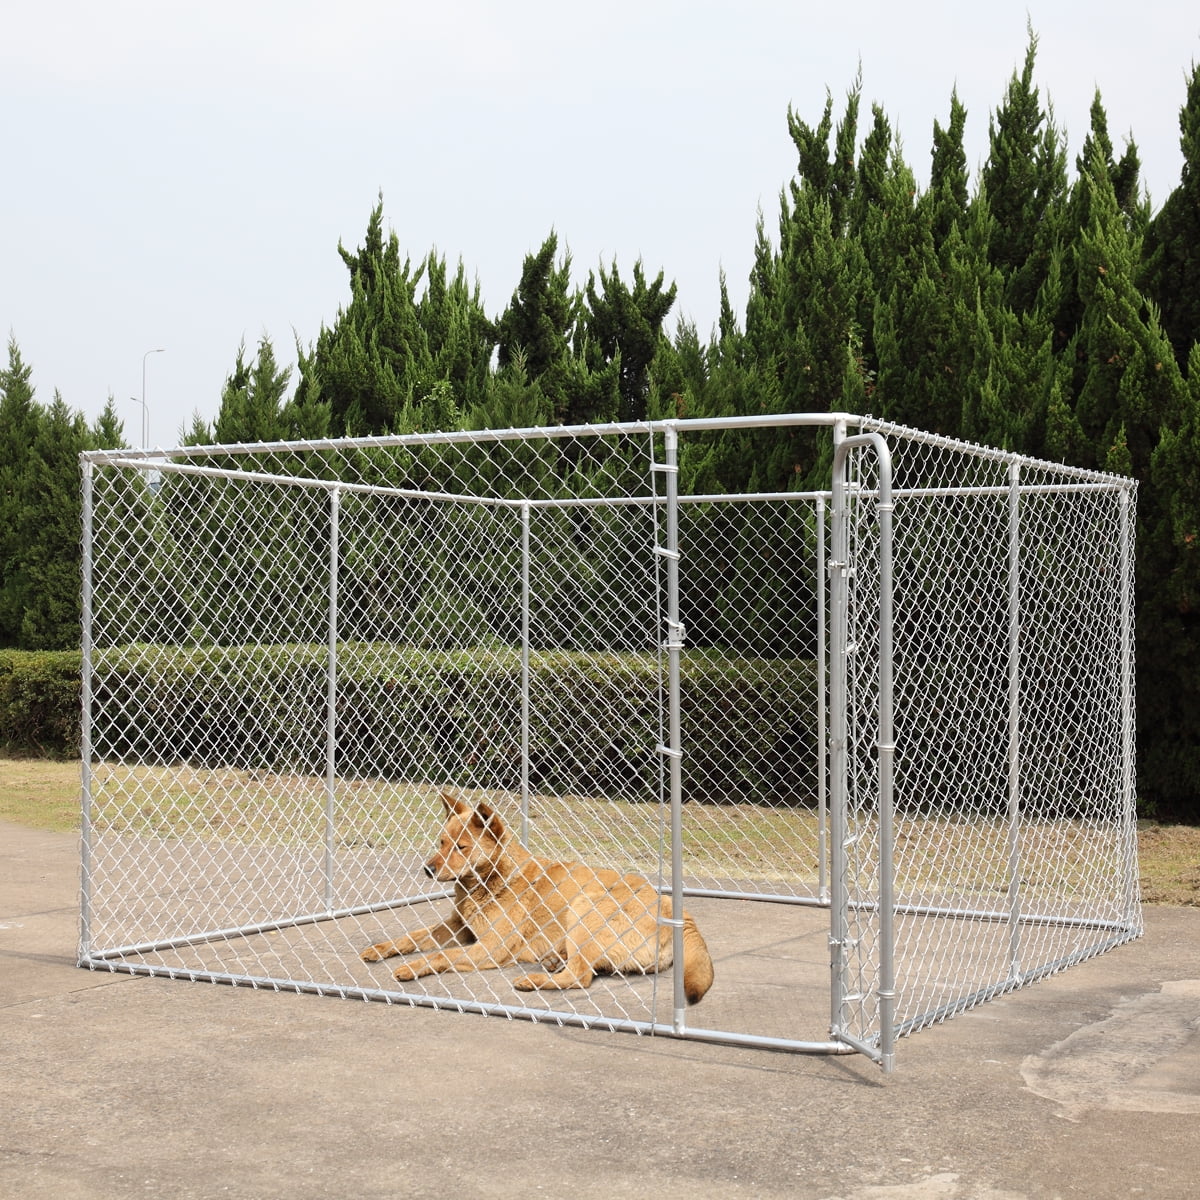 10x10 dog kennel with divider